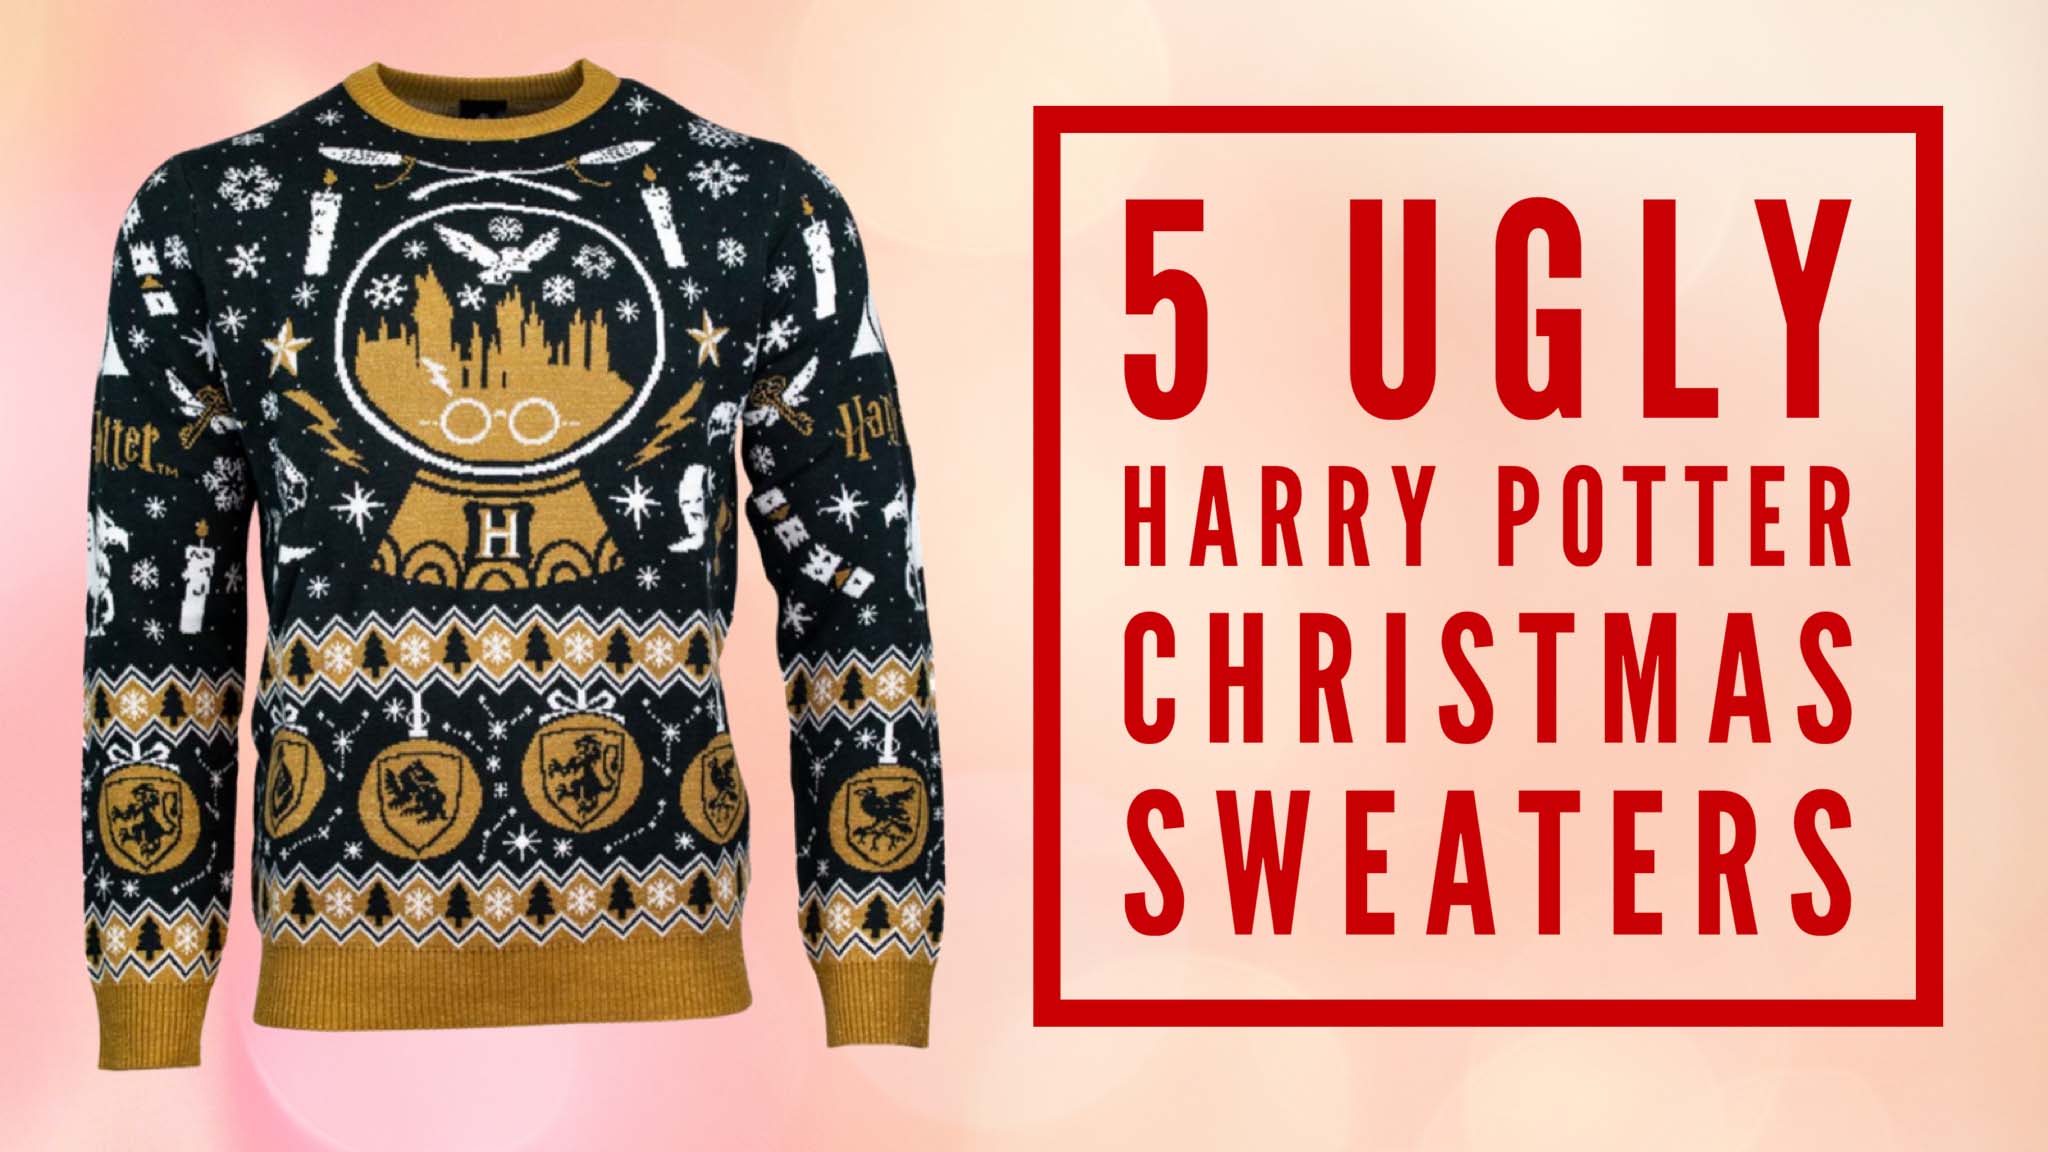 5 Ugly Harry Potter Christmas Sweaters